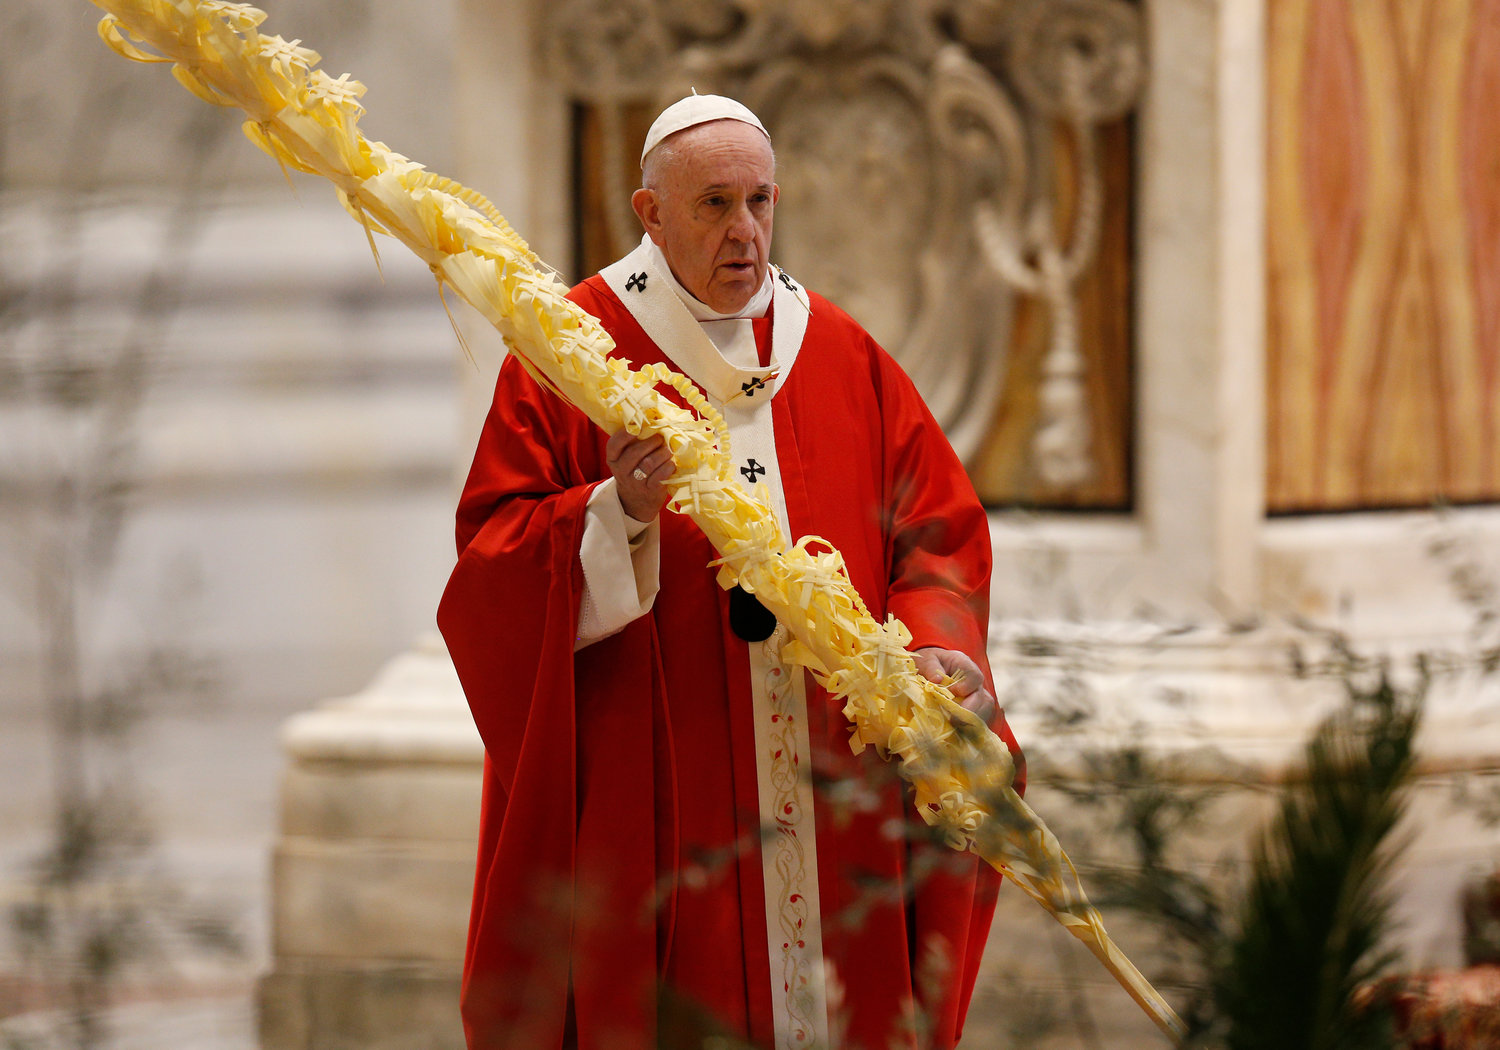 Pope Francis holds palm fronds celebrates Palm Sunday Mass in St. Peter's Basilica at the Vatican April 5, 2020. The Mass was celebrated without the presence of the public as Italy battles the coronavirus.